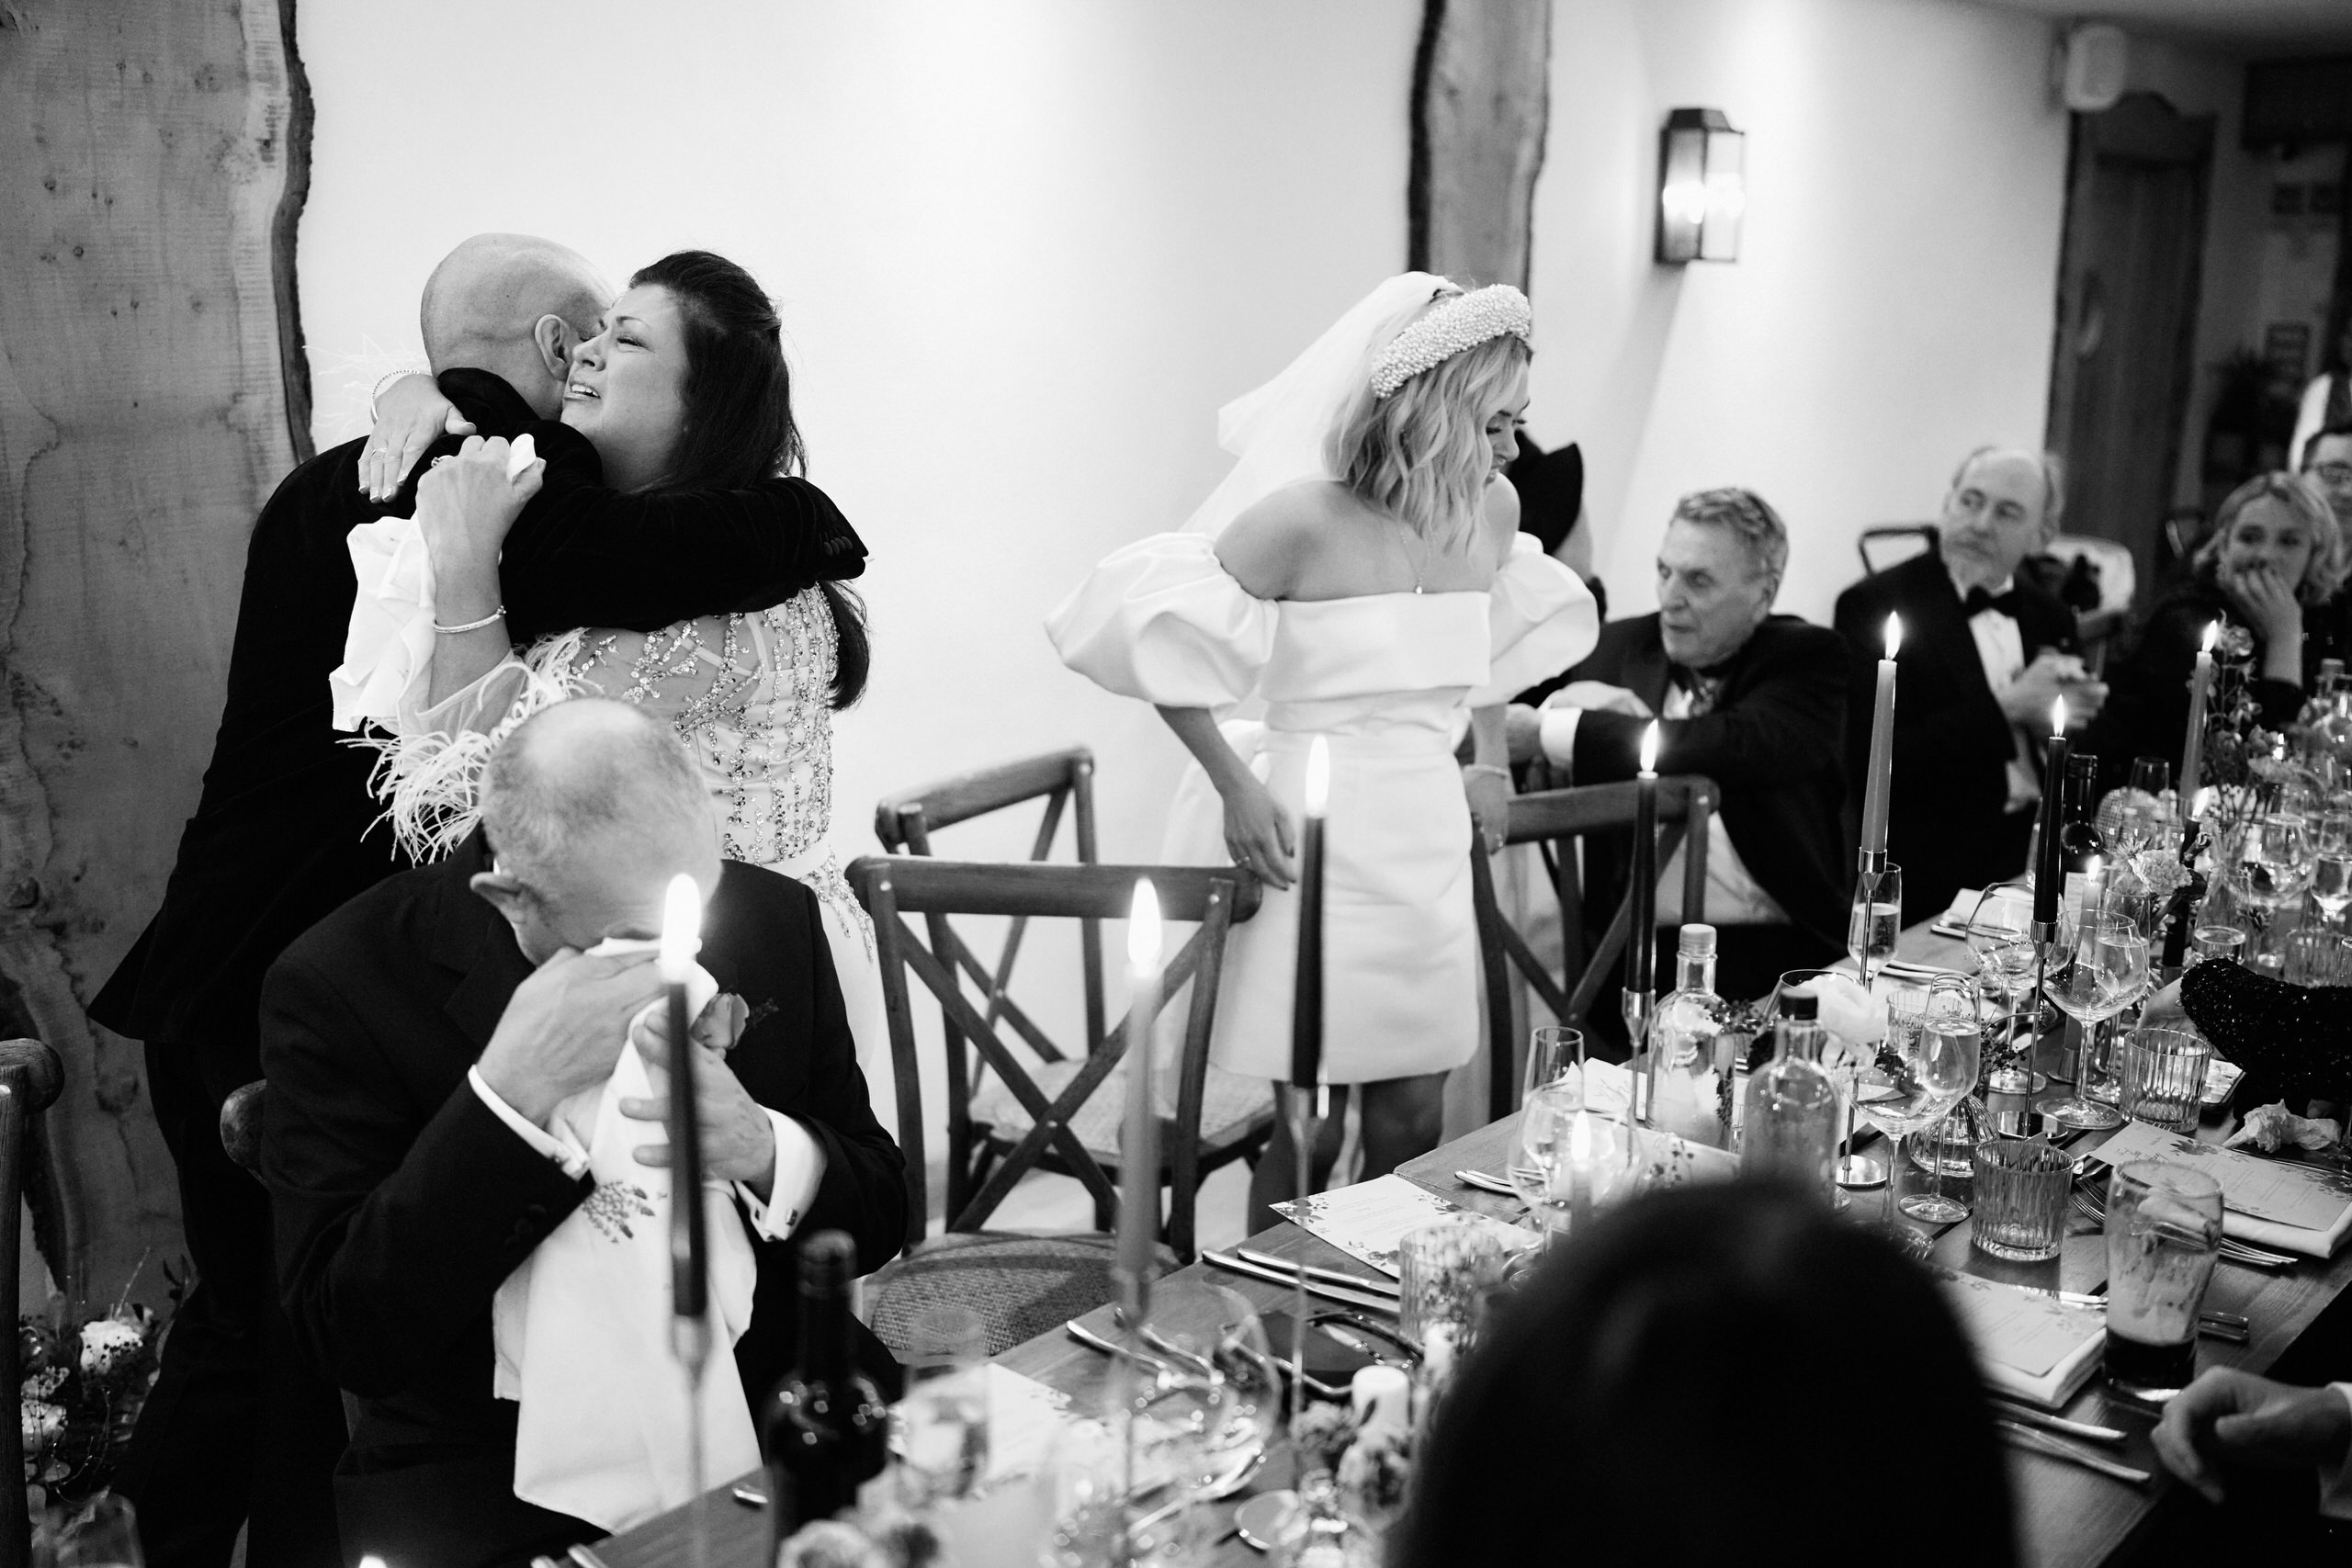 A man and woman kissing at their wedding party.